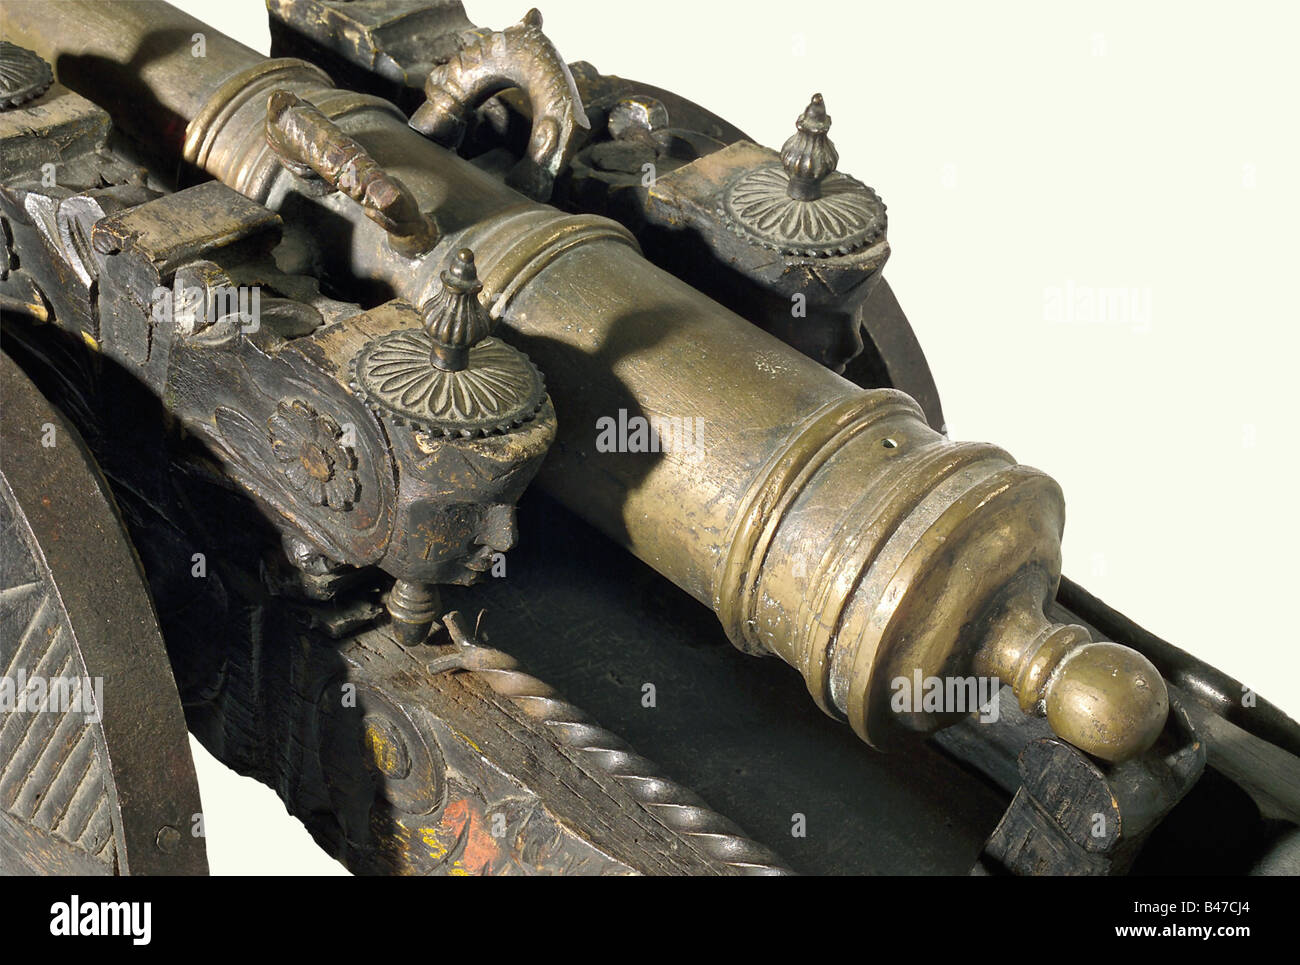 A model cannon, China, circa 1900. A heavy bronze barrel with a reinforced muzzle and breech. Touchhole on top with two dolphin-shaped handles. Barrel length 73 cm. Darkly finished, carved wooden carriage with iron furniture, full wooden wheels with star-shaped decoration, and iron loading tools. Total length 112 cm. historic, historical, 1900s, 20th century, 19th century, Far East, Far Eastern, weapon, arms, weapons, arms, military, militaria, clipping, cut out, cut-out, cut-outs, object, objects, stills, Stock Photo